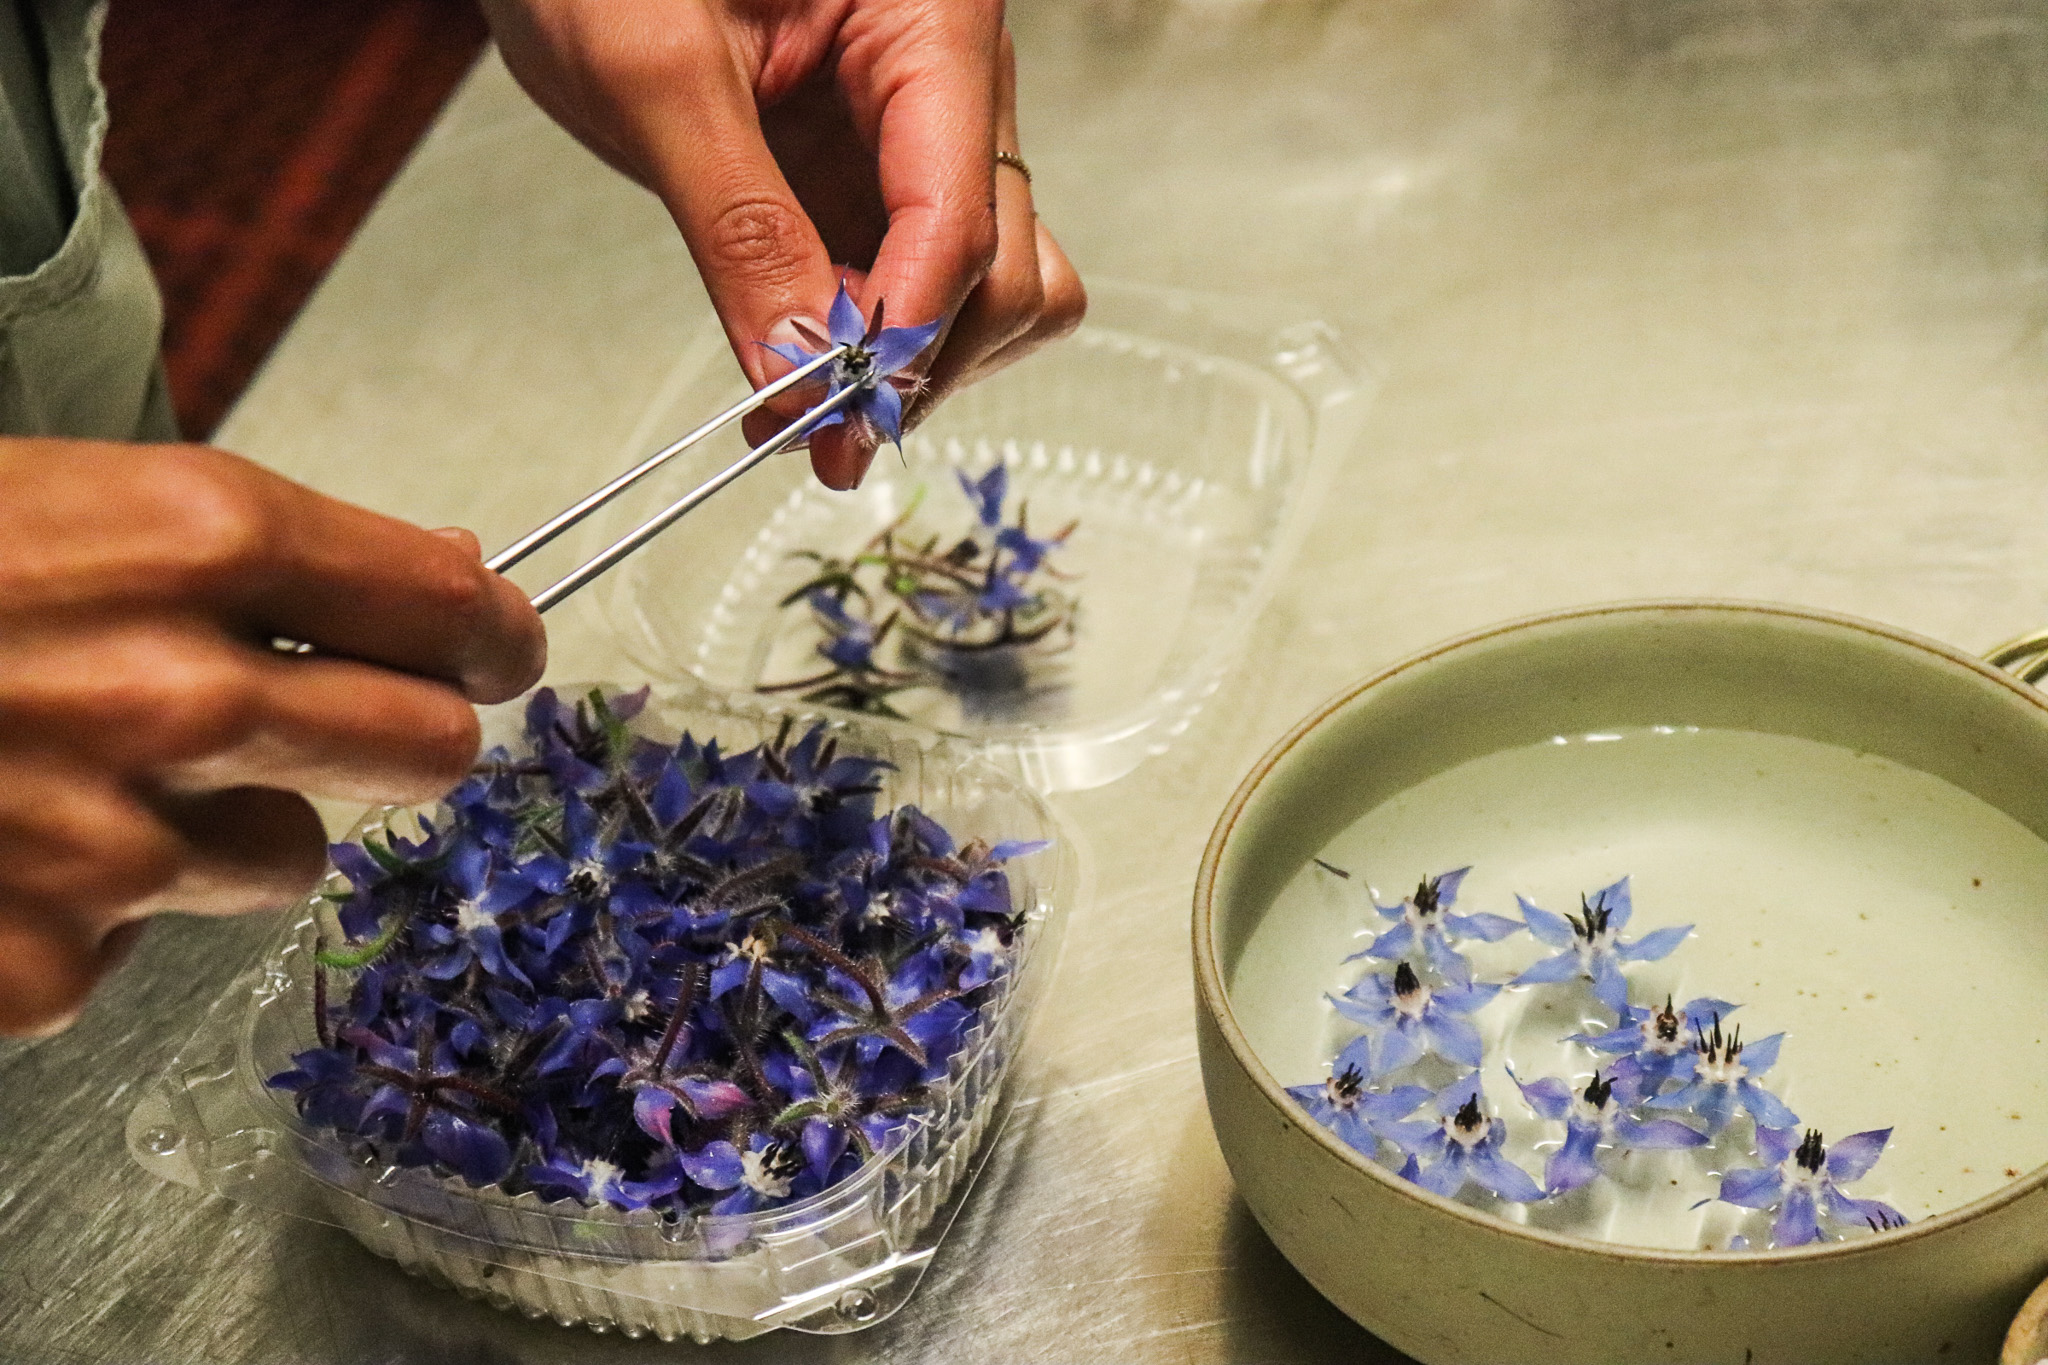 Hands holding tweezers and pulling small purple flowers out of a container